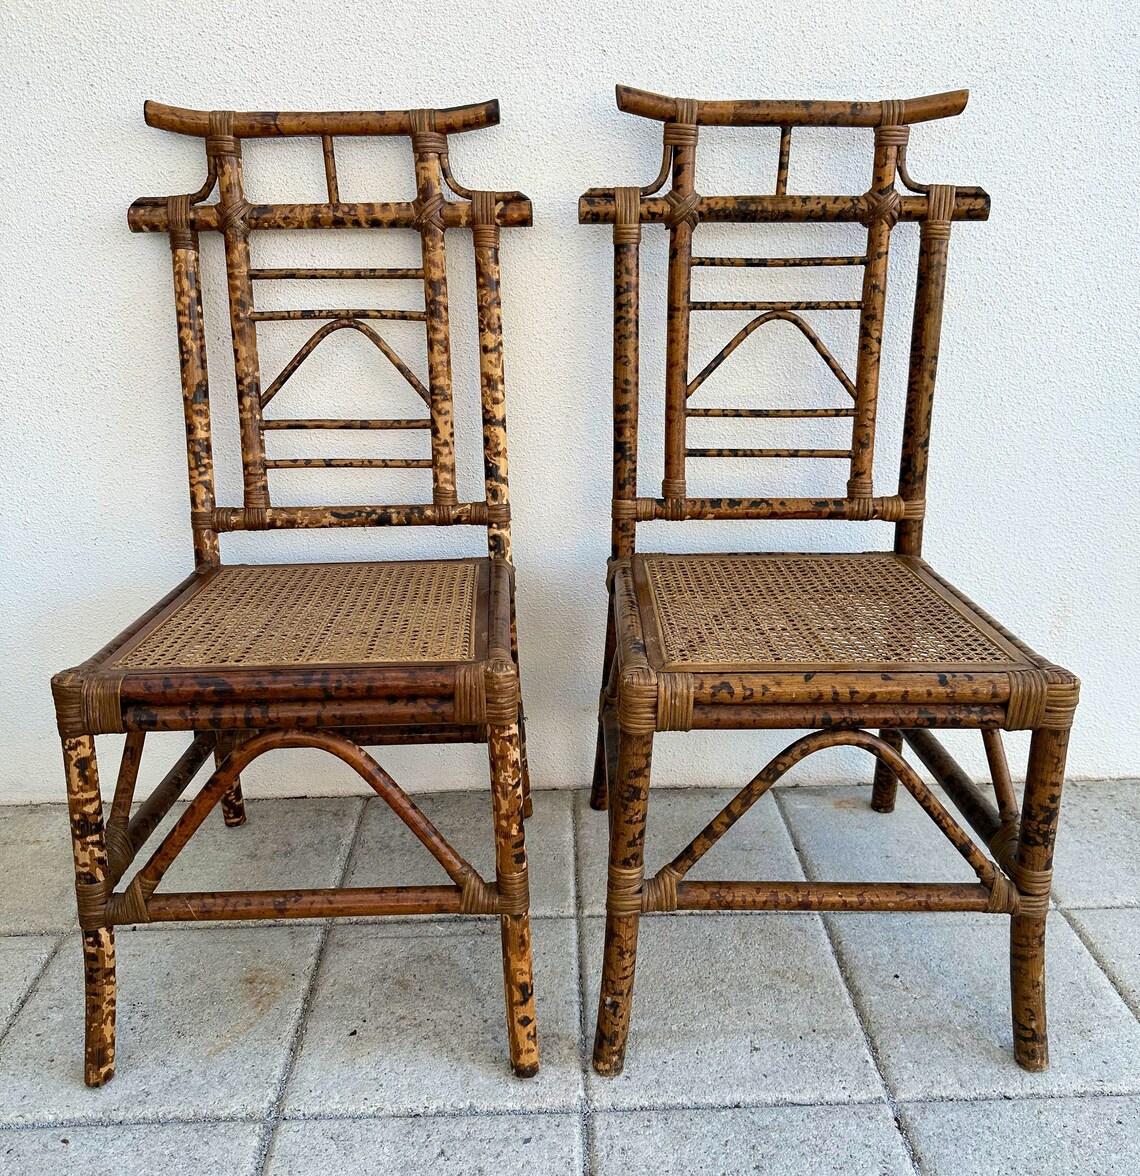 Rare set of 4 vintage burnt bamboo dining chairs. Pagoda design, beautifully rich in color, cane seats. Good vintage condition with some wear throughout. One of the cane seats was recently replaced. These chairs would be a great addition to any Palm